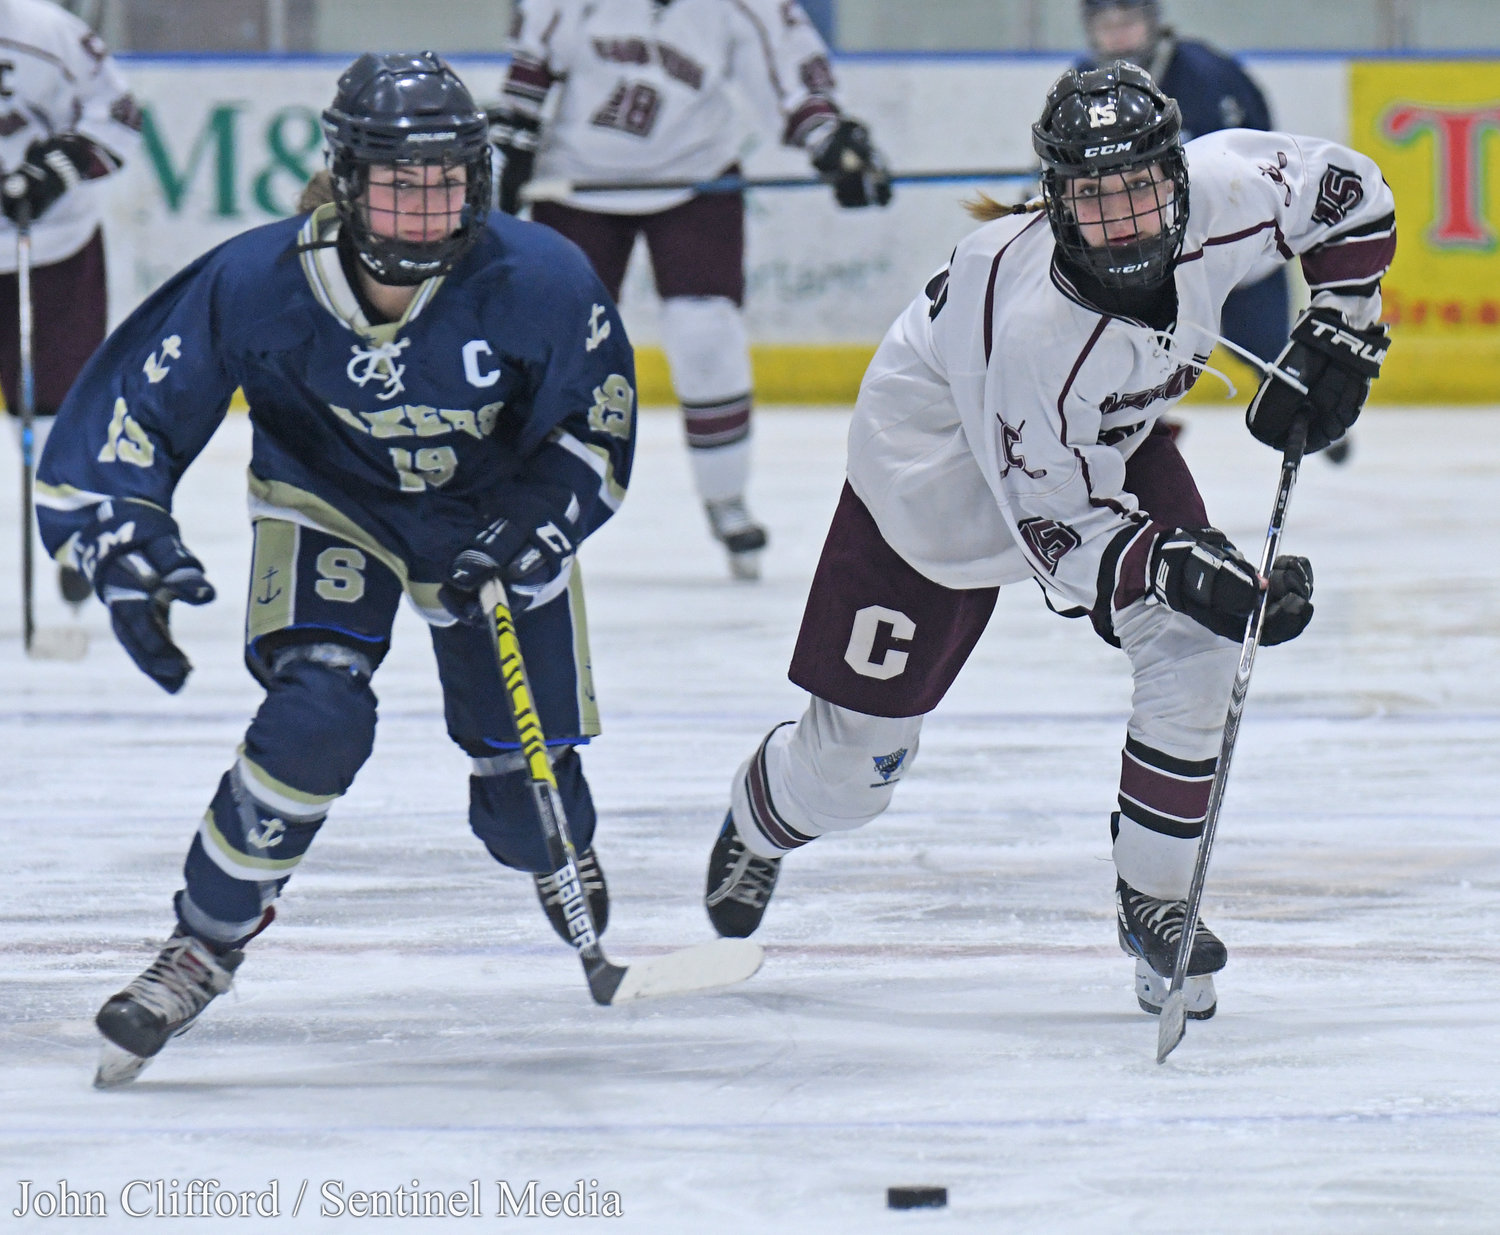 The Clinton Warriors in action against the Skaneateles Lakers in the Section III girls ice hockey championship Wednesday night in Nedrow. Clinton beat Skaneateles 1-0 in overtime. Lakers #19 and Clinton #15 chase the puck up the ice.